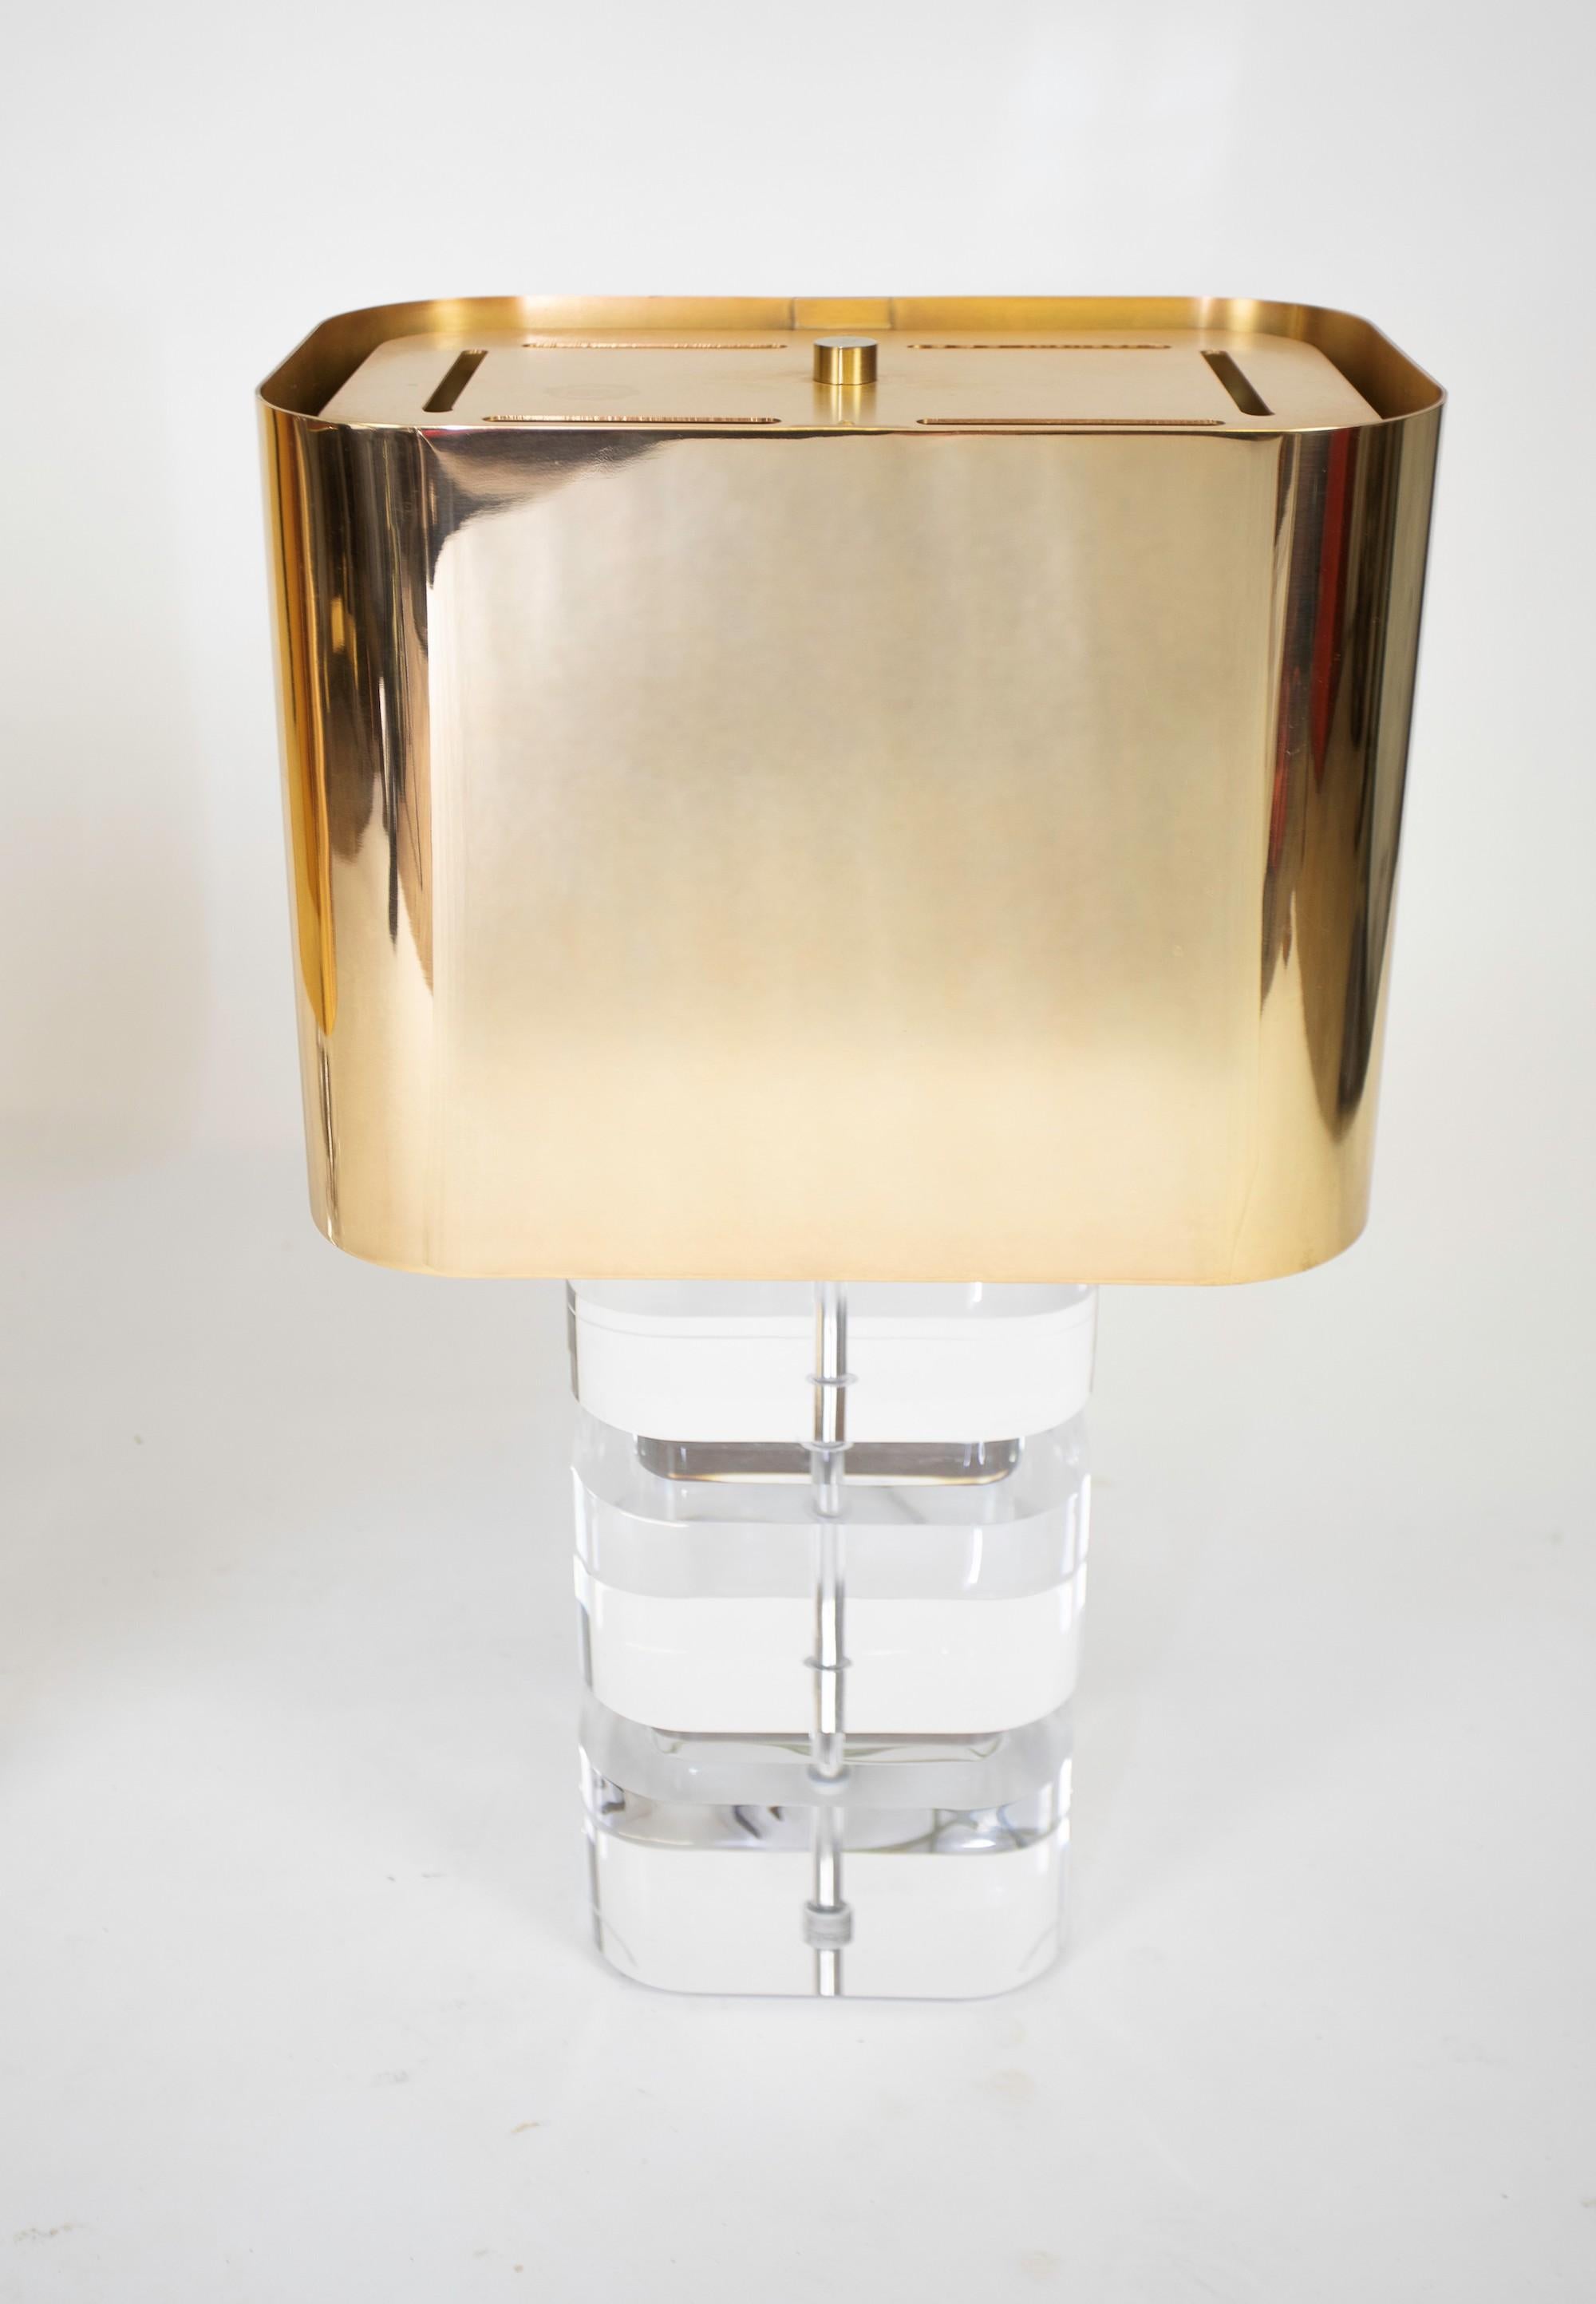 North American Karl Springer Stacked- Lucite Table Lamps Metal Shades